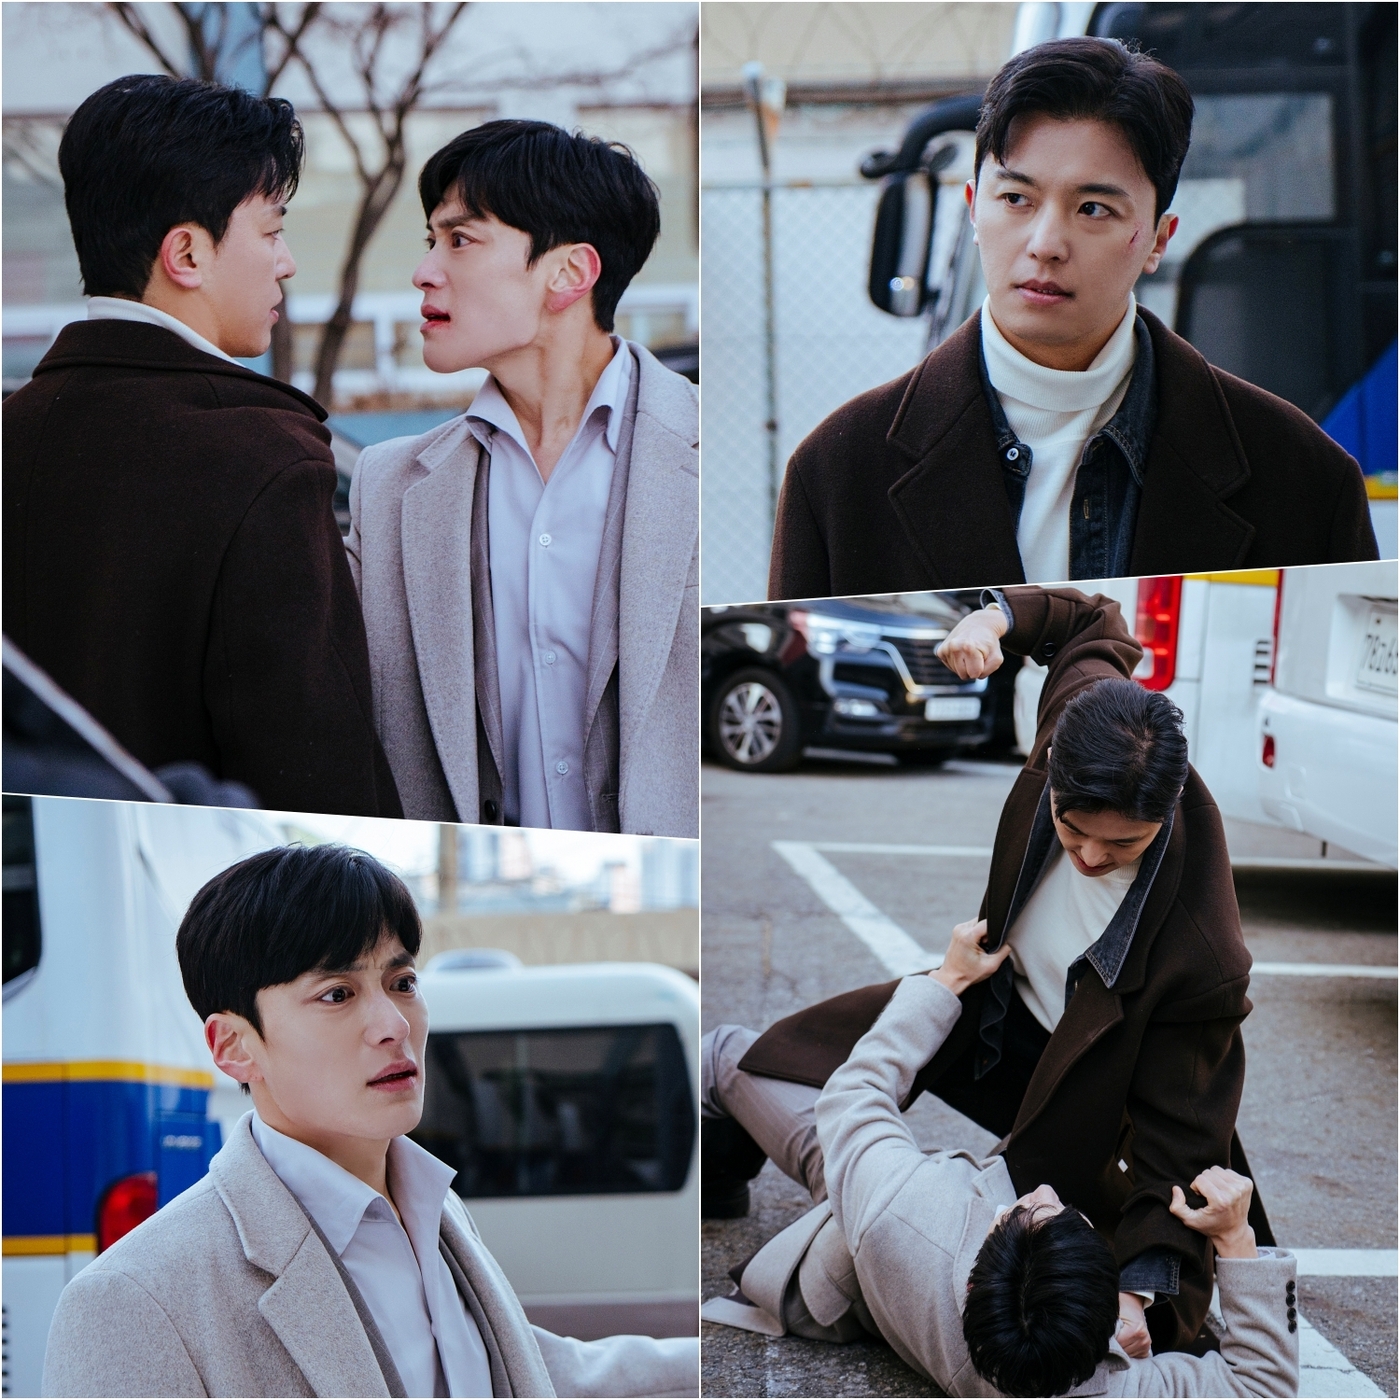 Yeon Woo Jin And Jang Seung Jo Get Into A Physical Confrontation In 